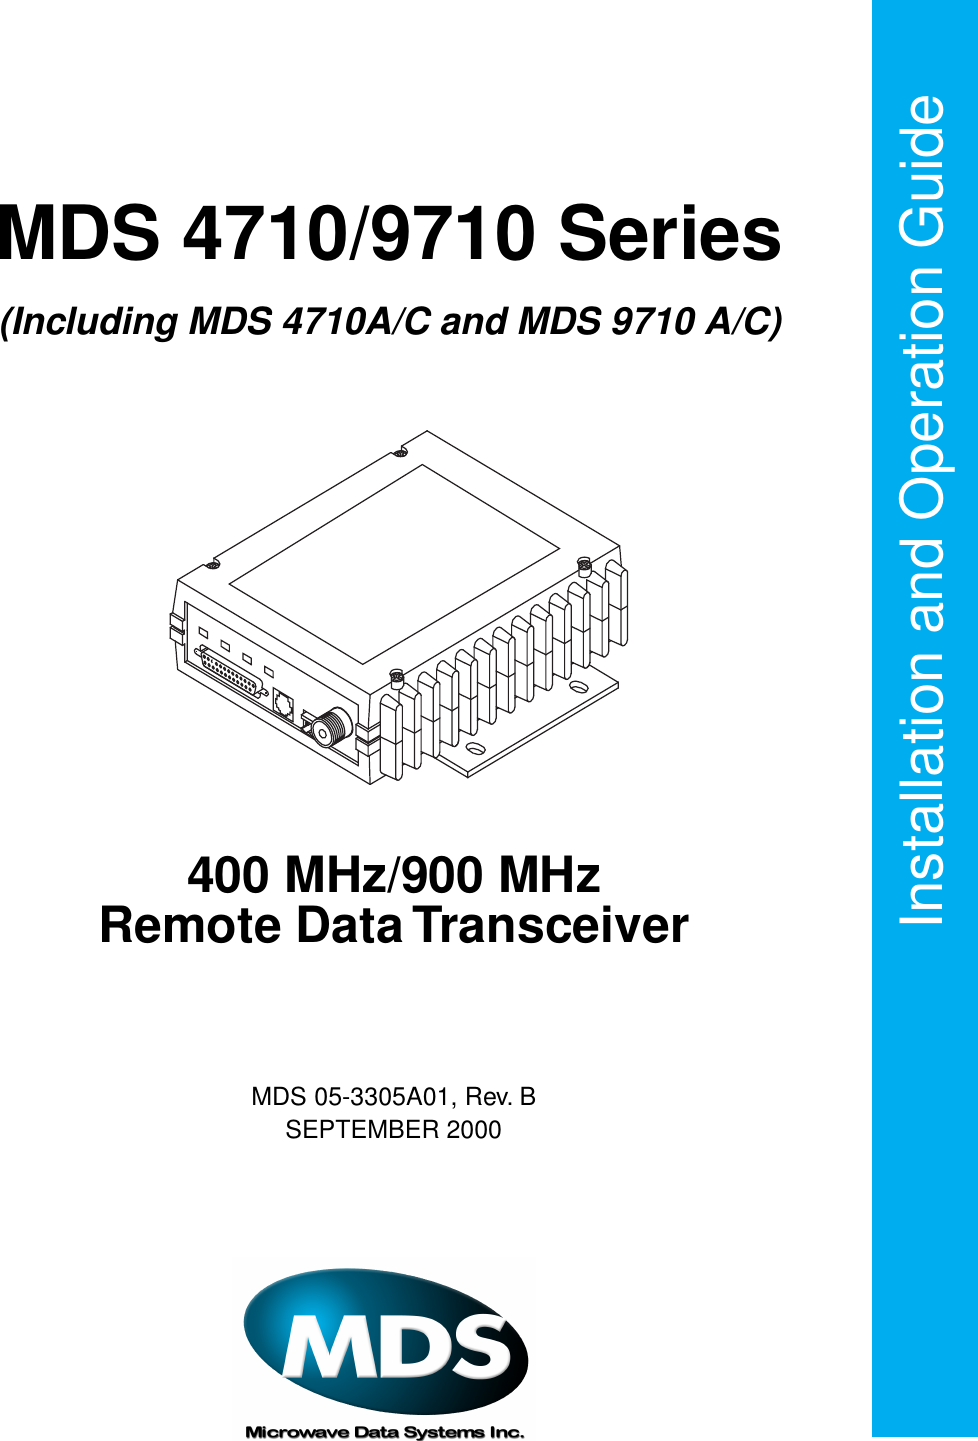  Installation and Operation Guide MDS 05-3305A01, Rev. BSEPTEMBER 2000 400 MHz/900 MHzRemote Data Transceiver MDS 4710/9710 Series (Including MDS 4710A/C and MDS 9710 A/C)